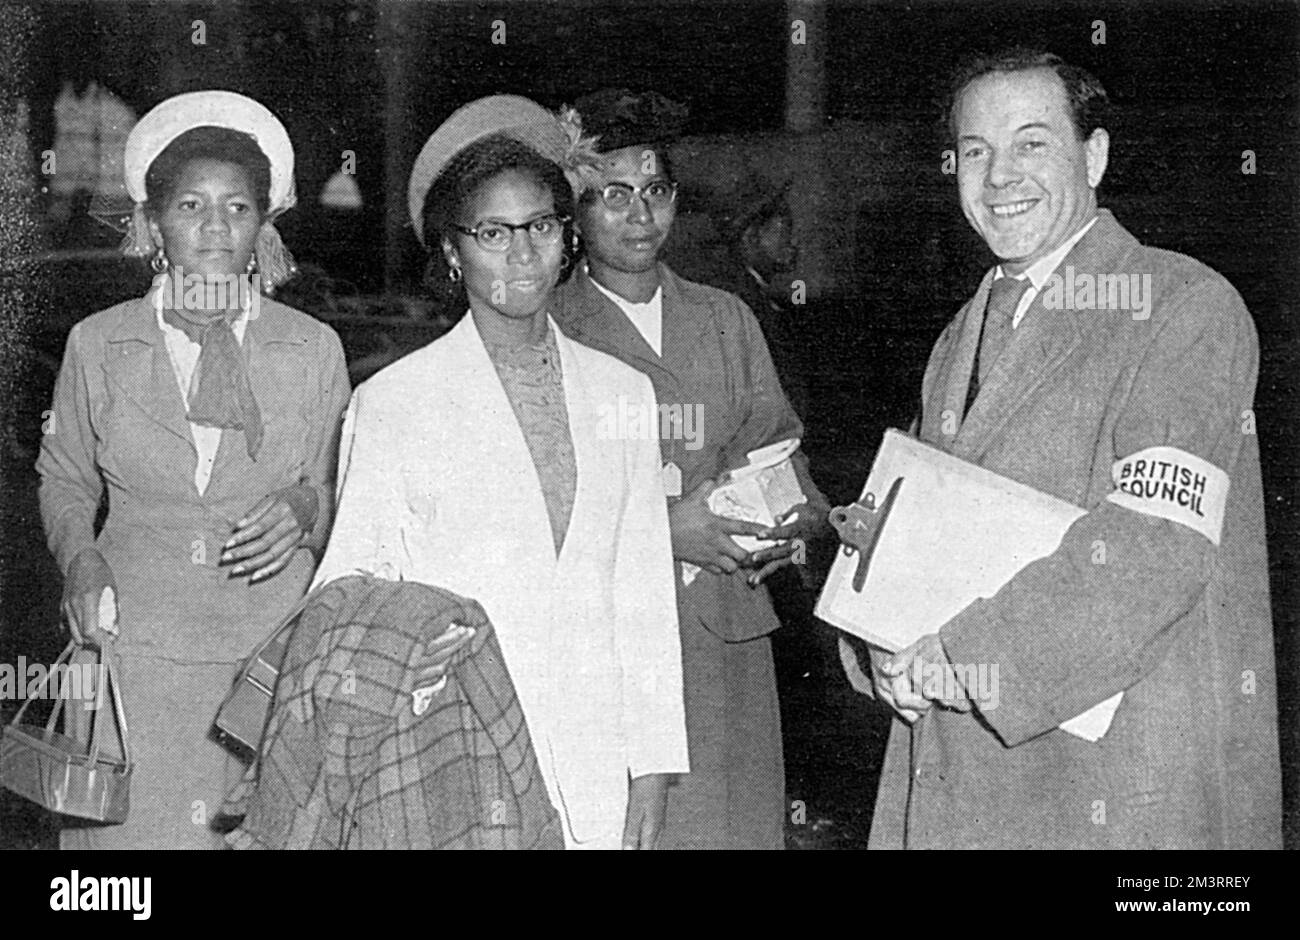 An official of the British Council gives Jamaican students advice on their arrival in Britain in the 1950s.       Date: 1954 Stock Photo